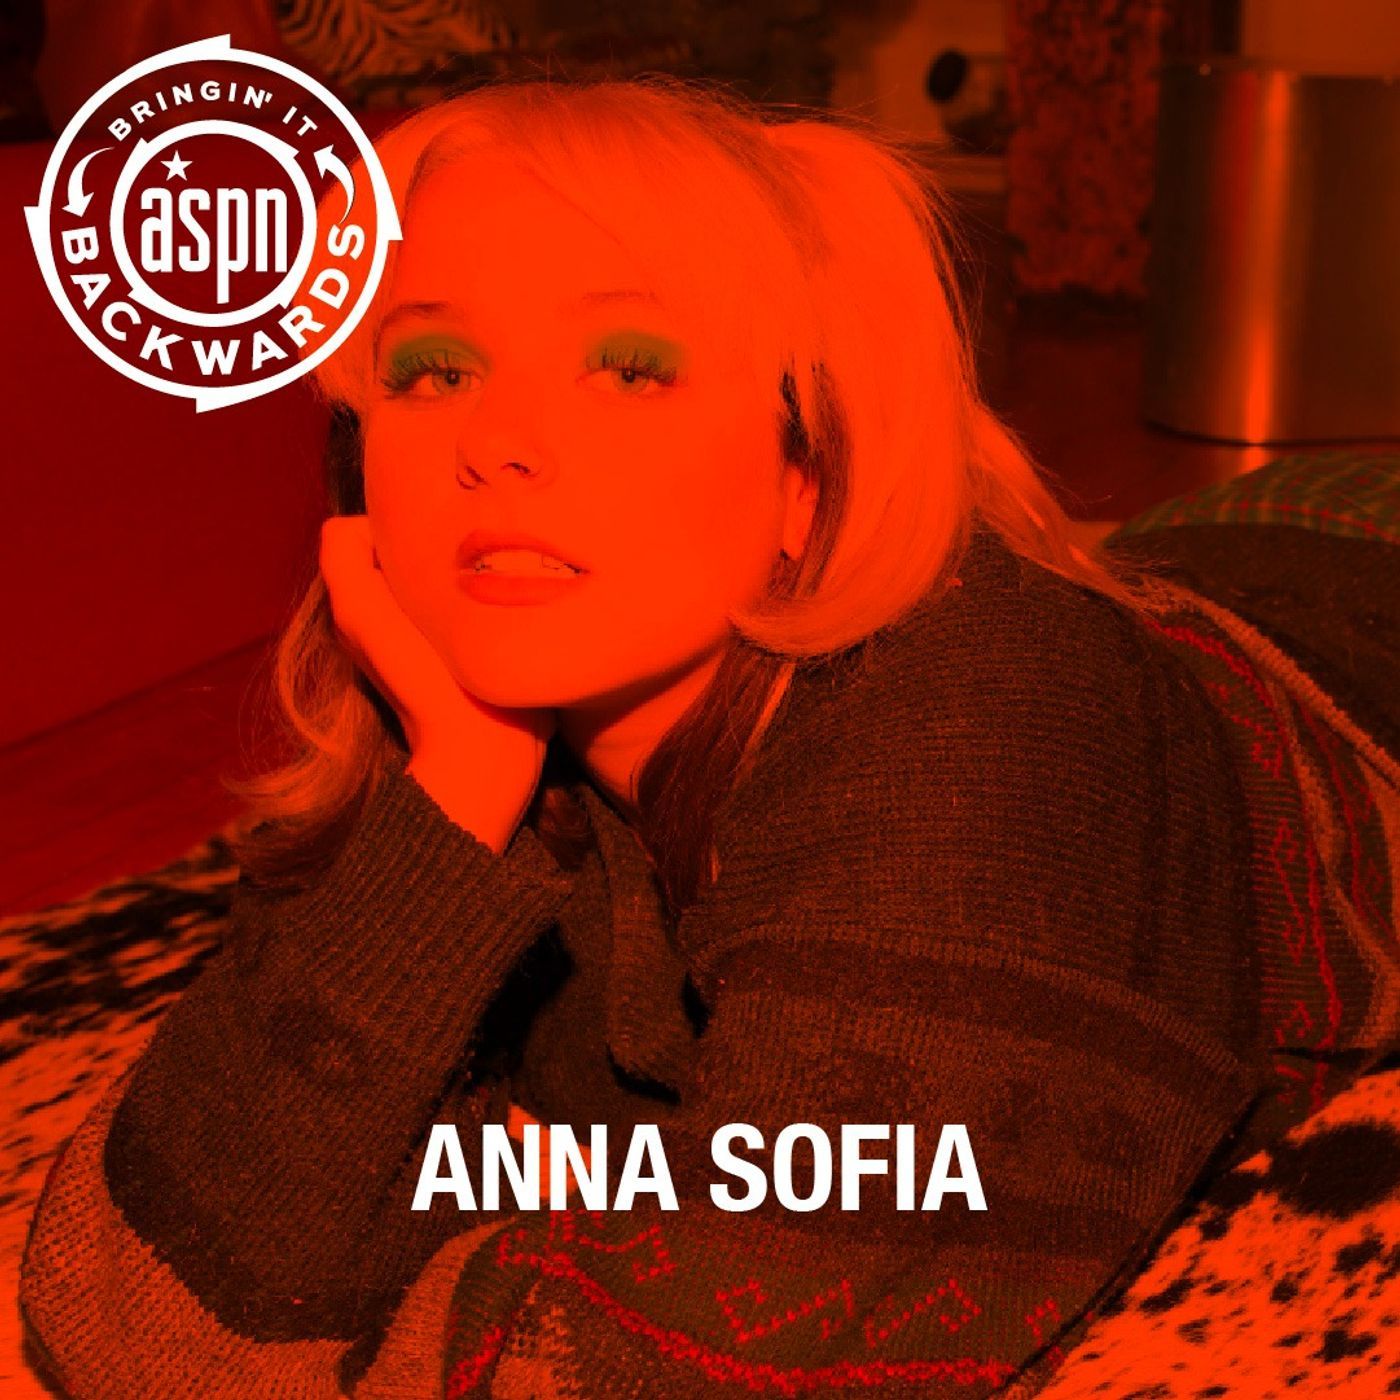 Interview with Anna Sofia Image